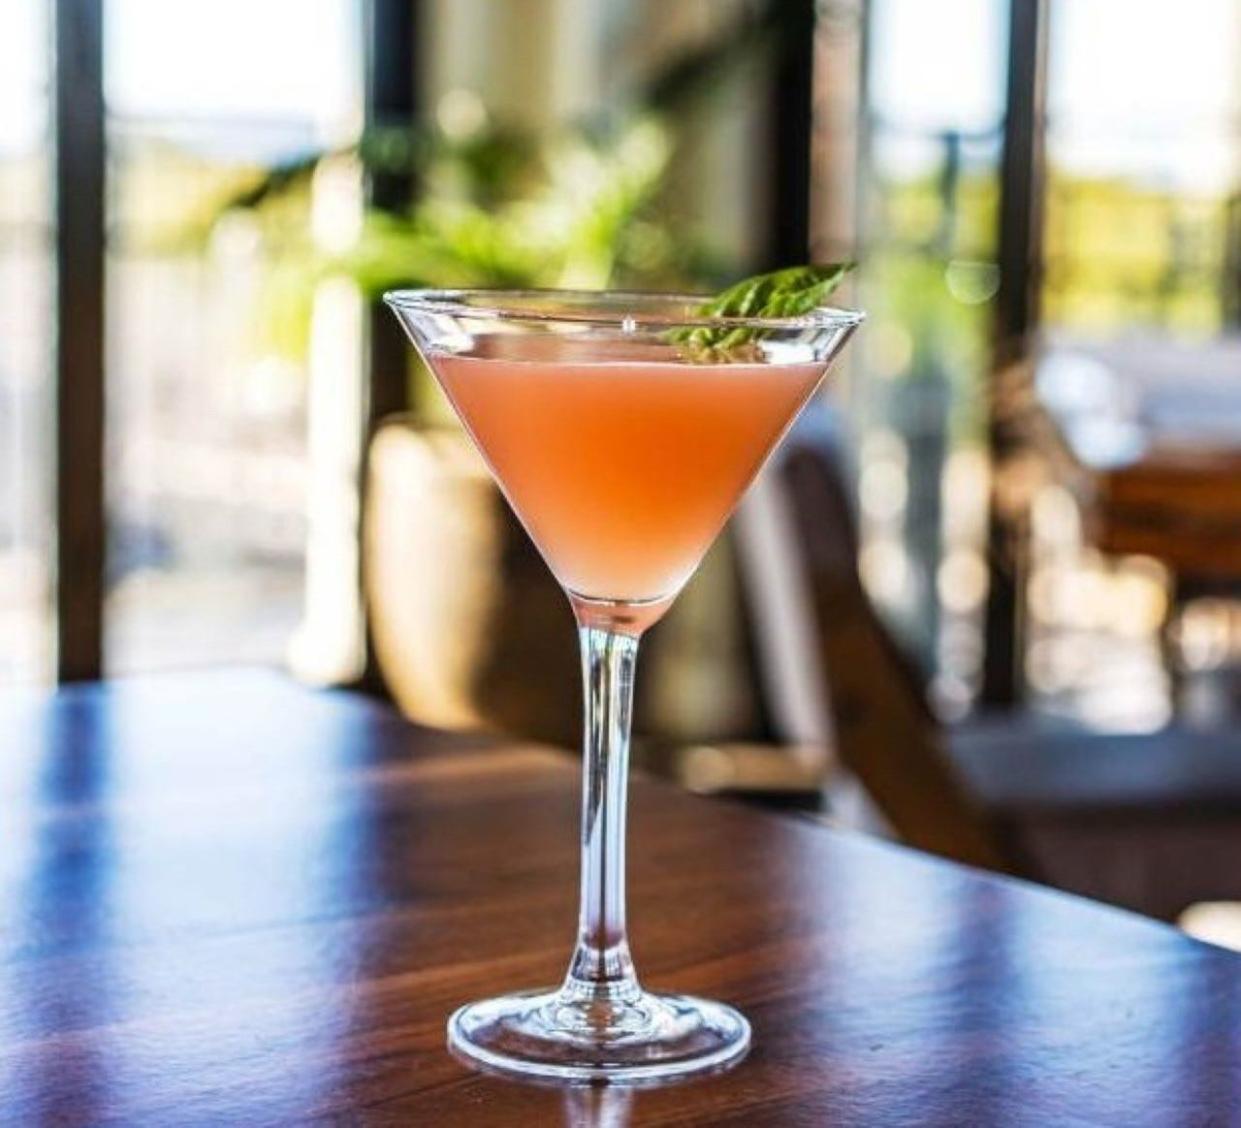 Tommy Bahama's signature Grapefruit-Basil Martini is on the cocktail menu at the new Marlin Bar in Palm Beach Gardens.